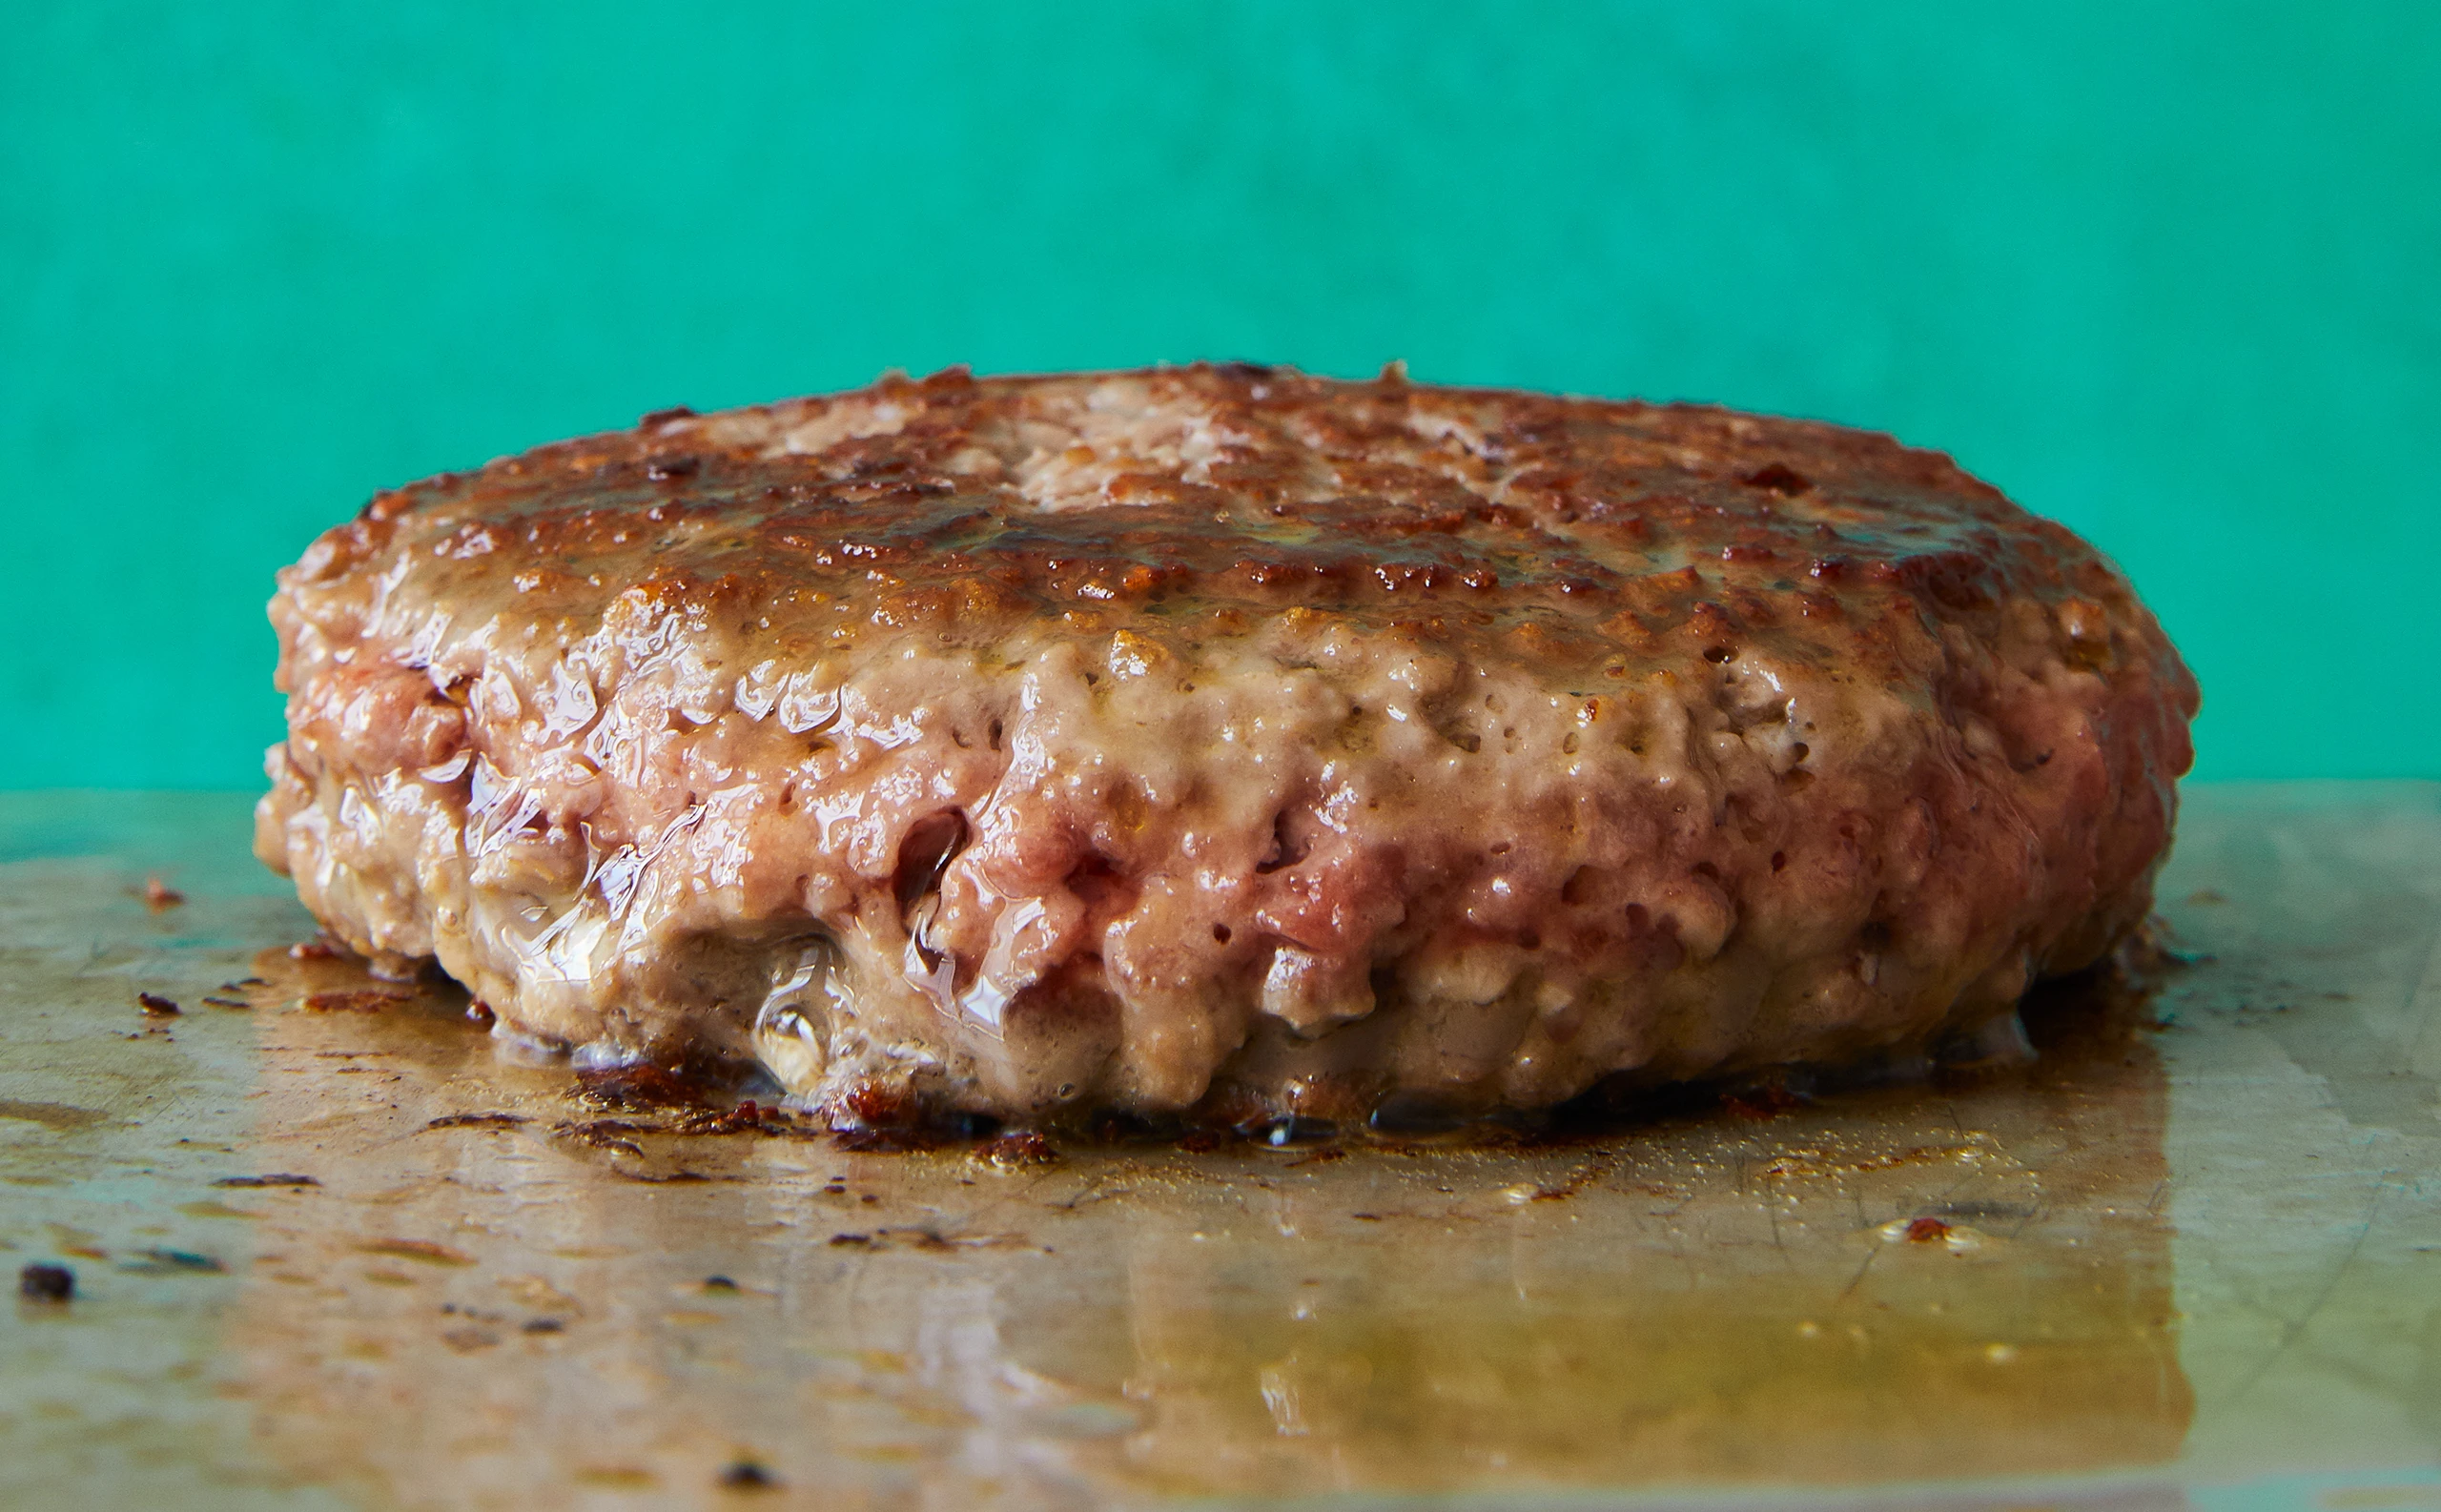 Impossible burger patty cooked on a griddle